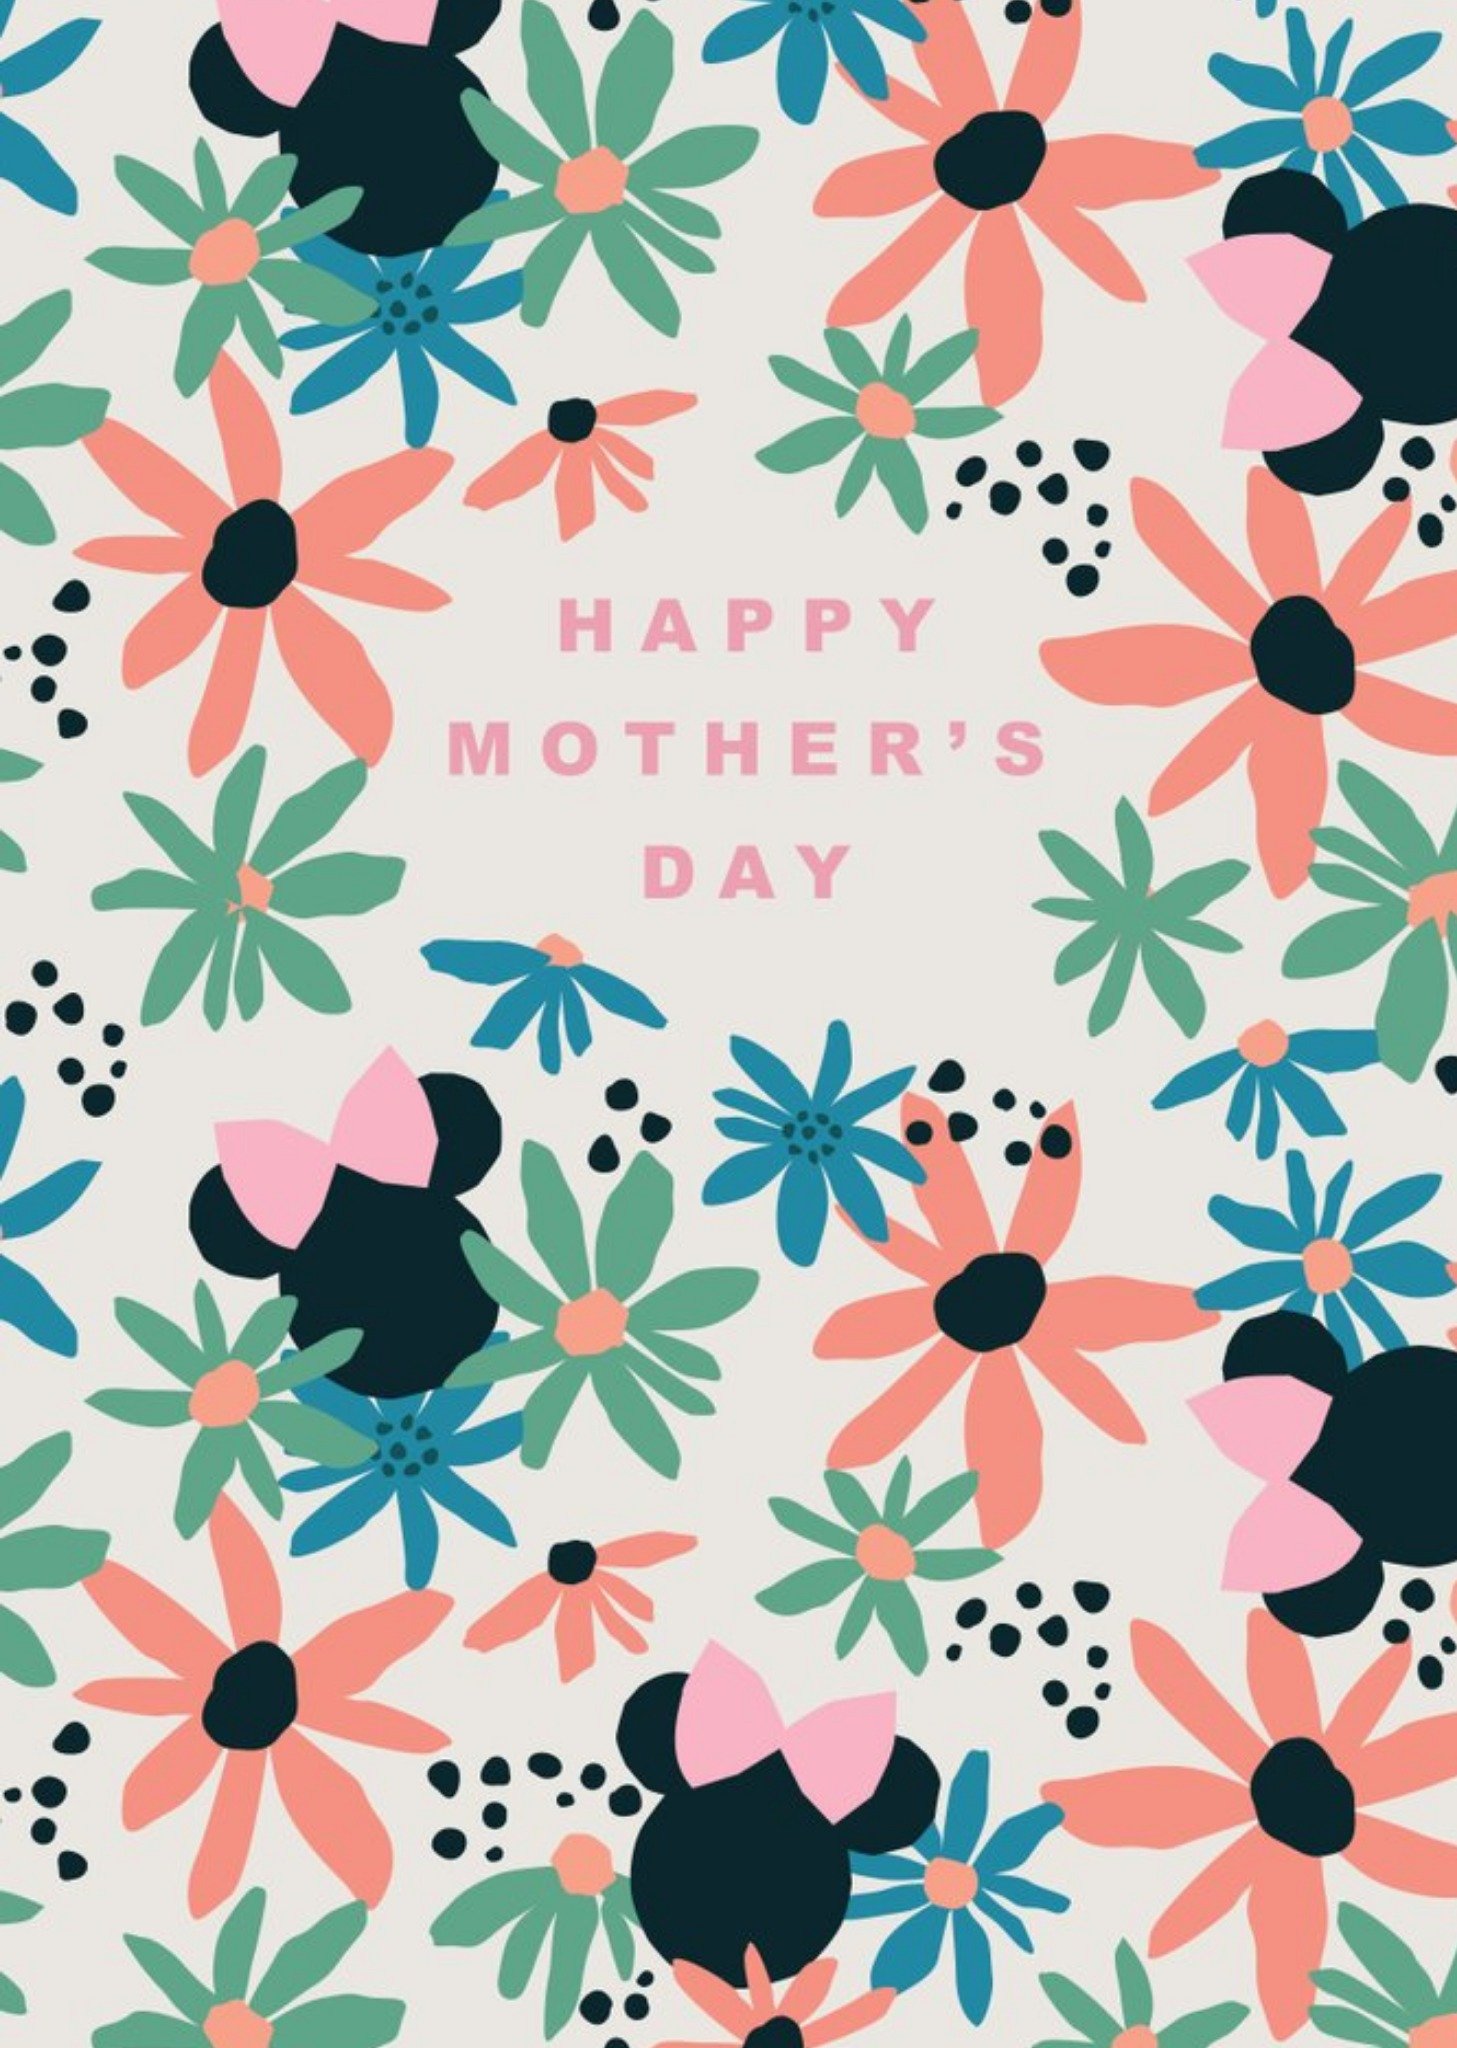 Disney Luxe Cute Floral Mother's Day Card Ecard